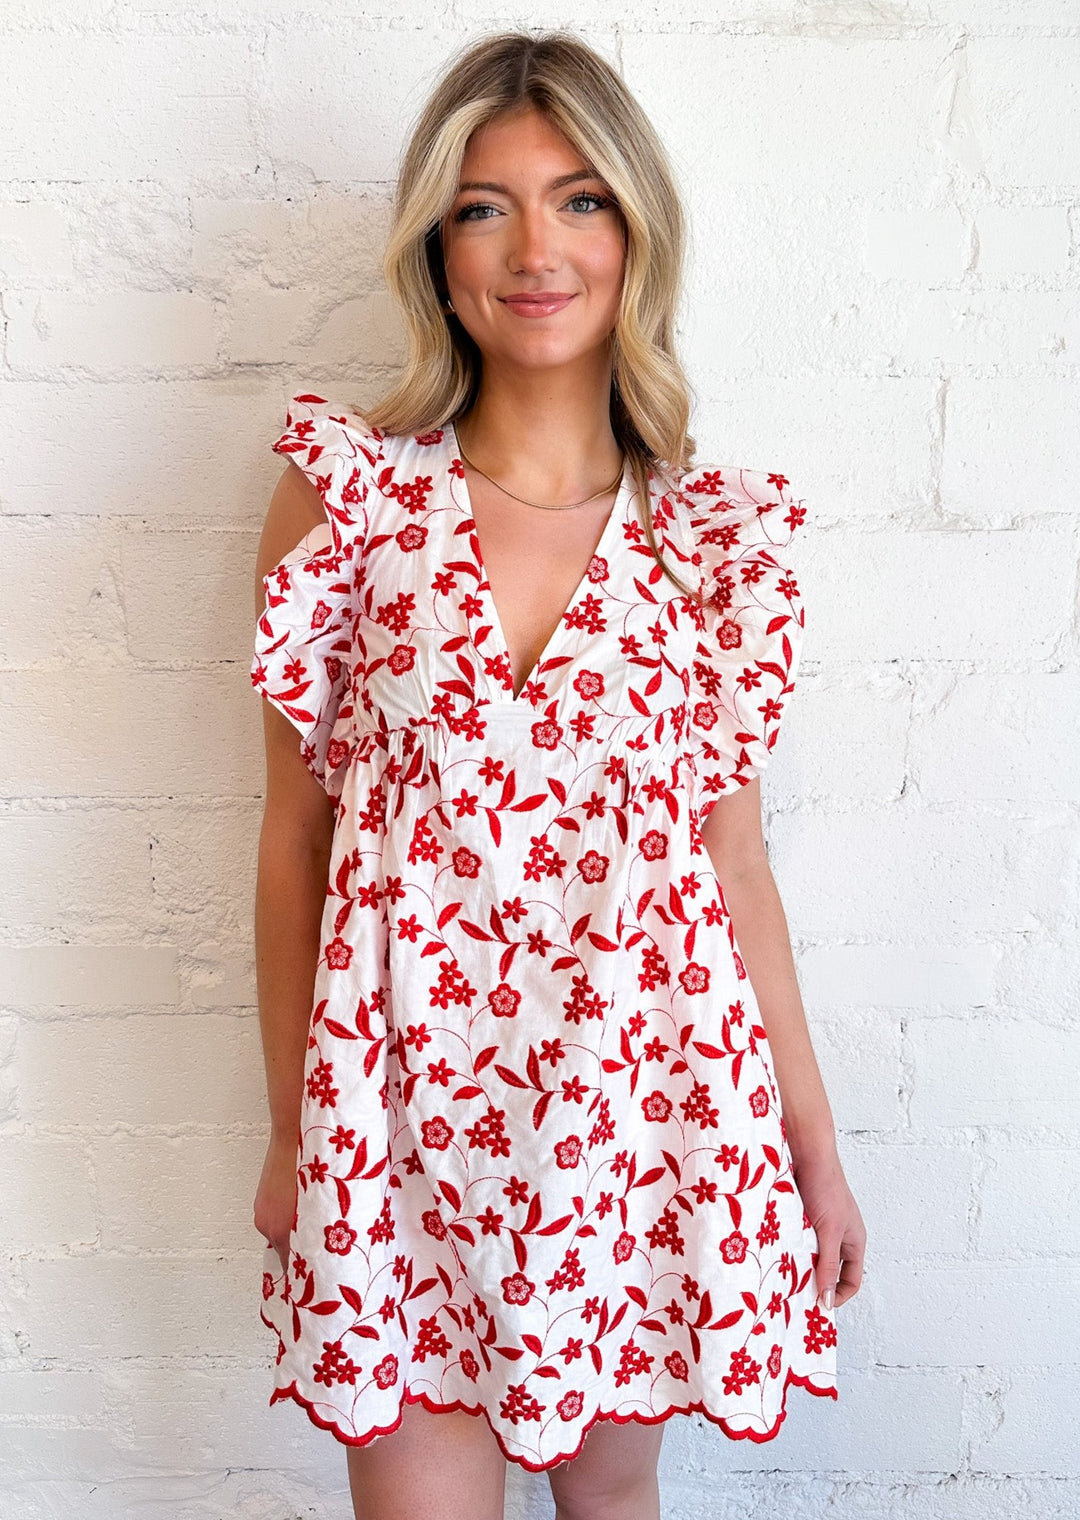 American Girl Embroidered Dress, Dresses, Adeline, Adeline, dallas boutique, dallas texas, texas boutique, women's boutique dallas, adeline boutique, dallas boutique, trendy boutique, affordable boutique